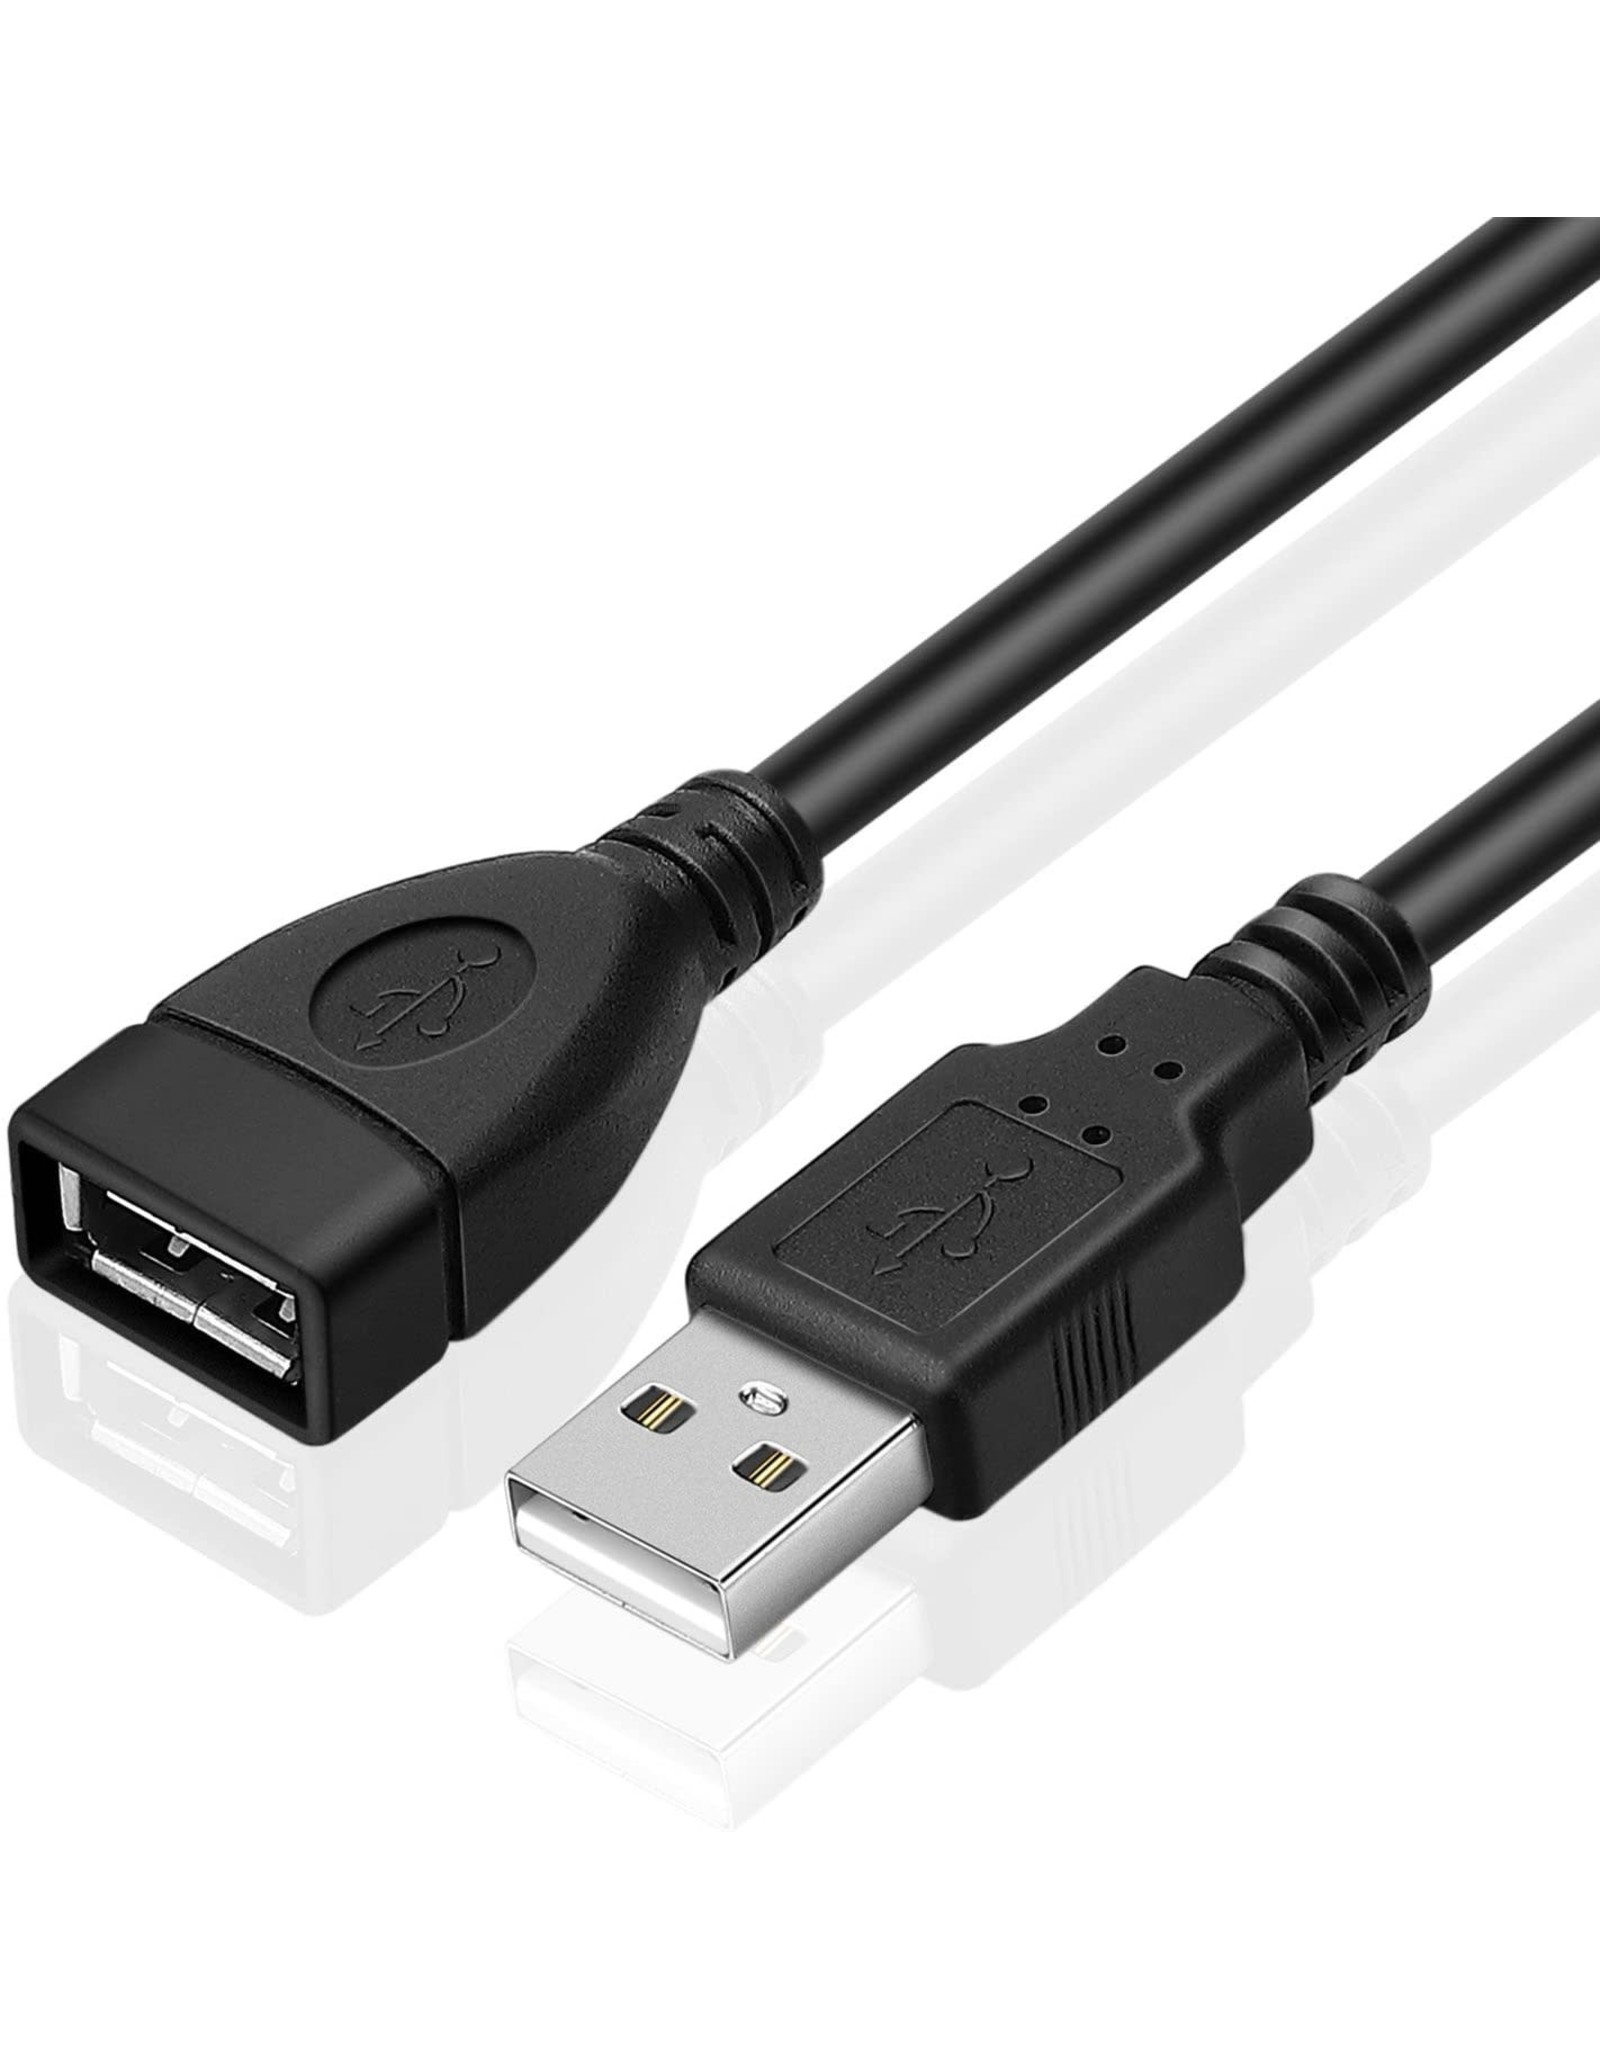 USB Extension Cable 2.5 ft